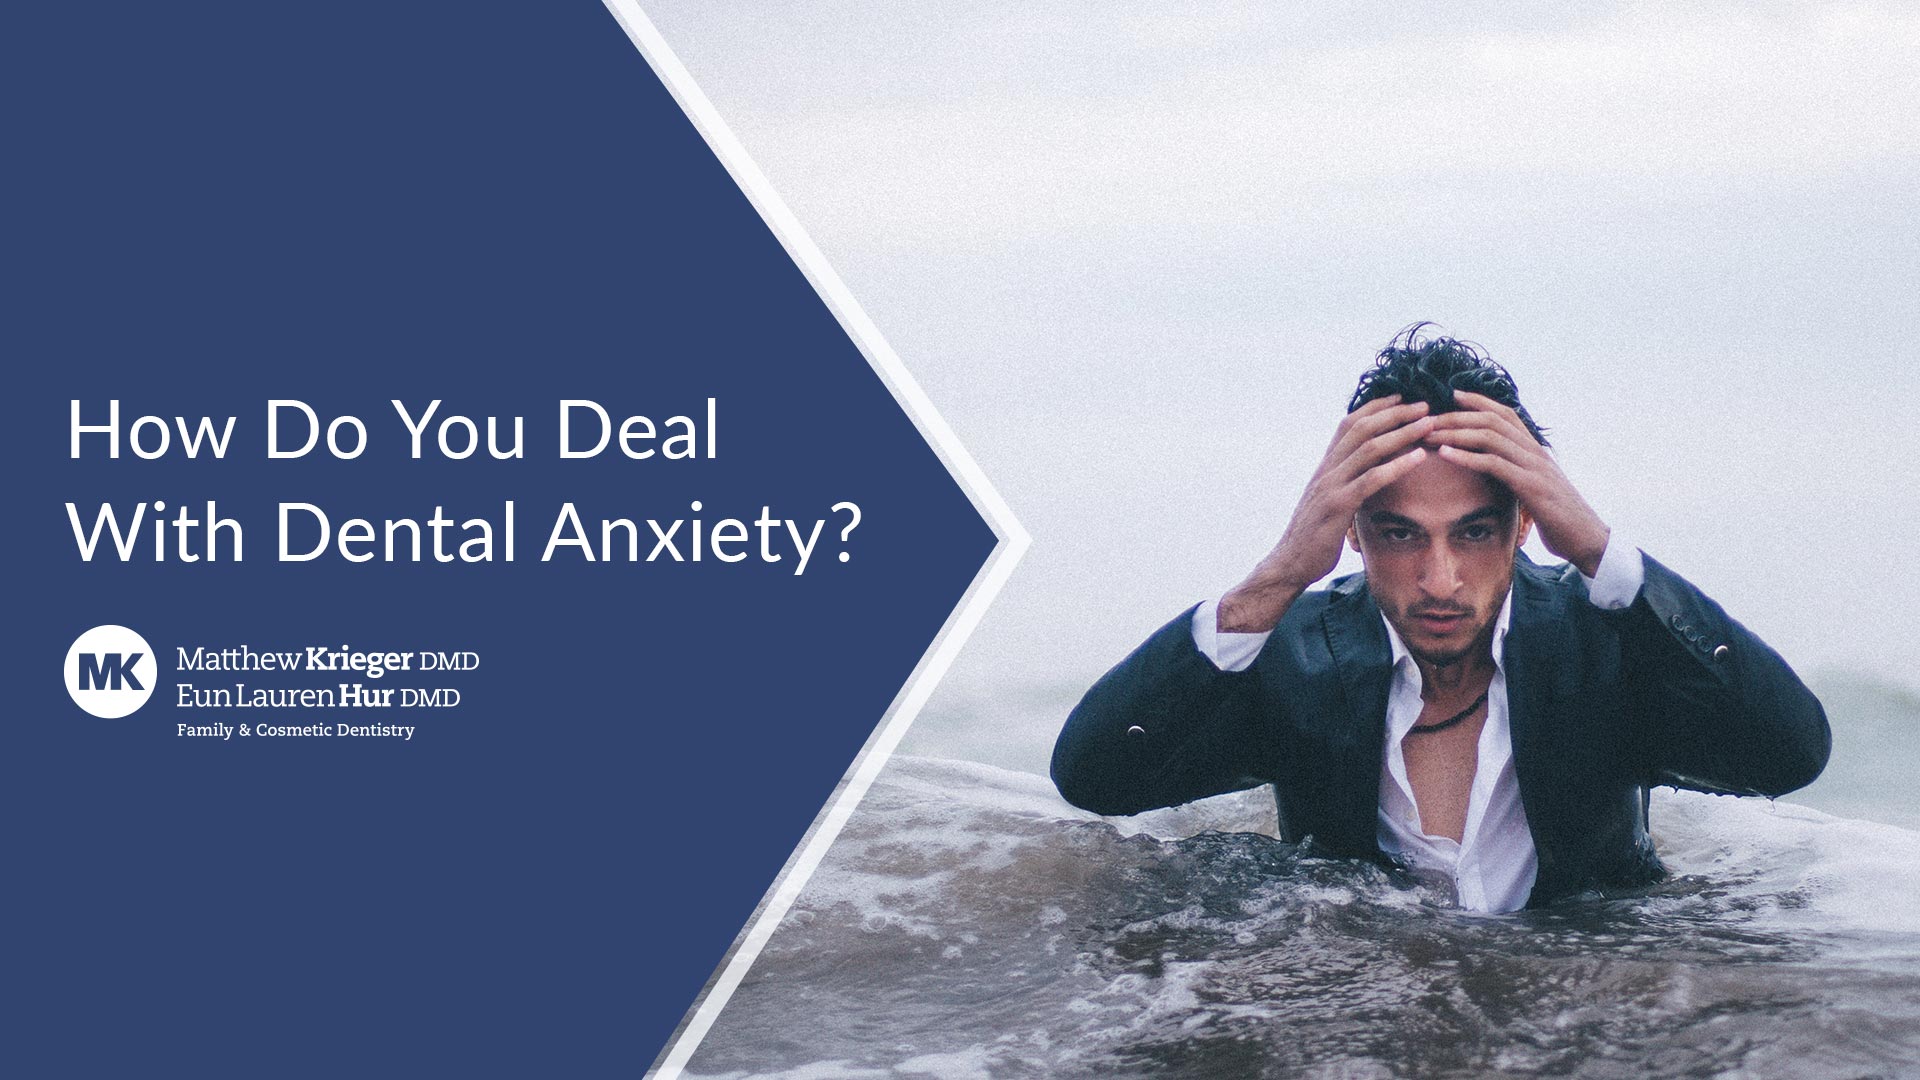 How Do You Deal With Dental Anxiety?